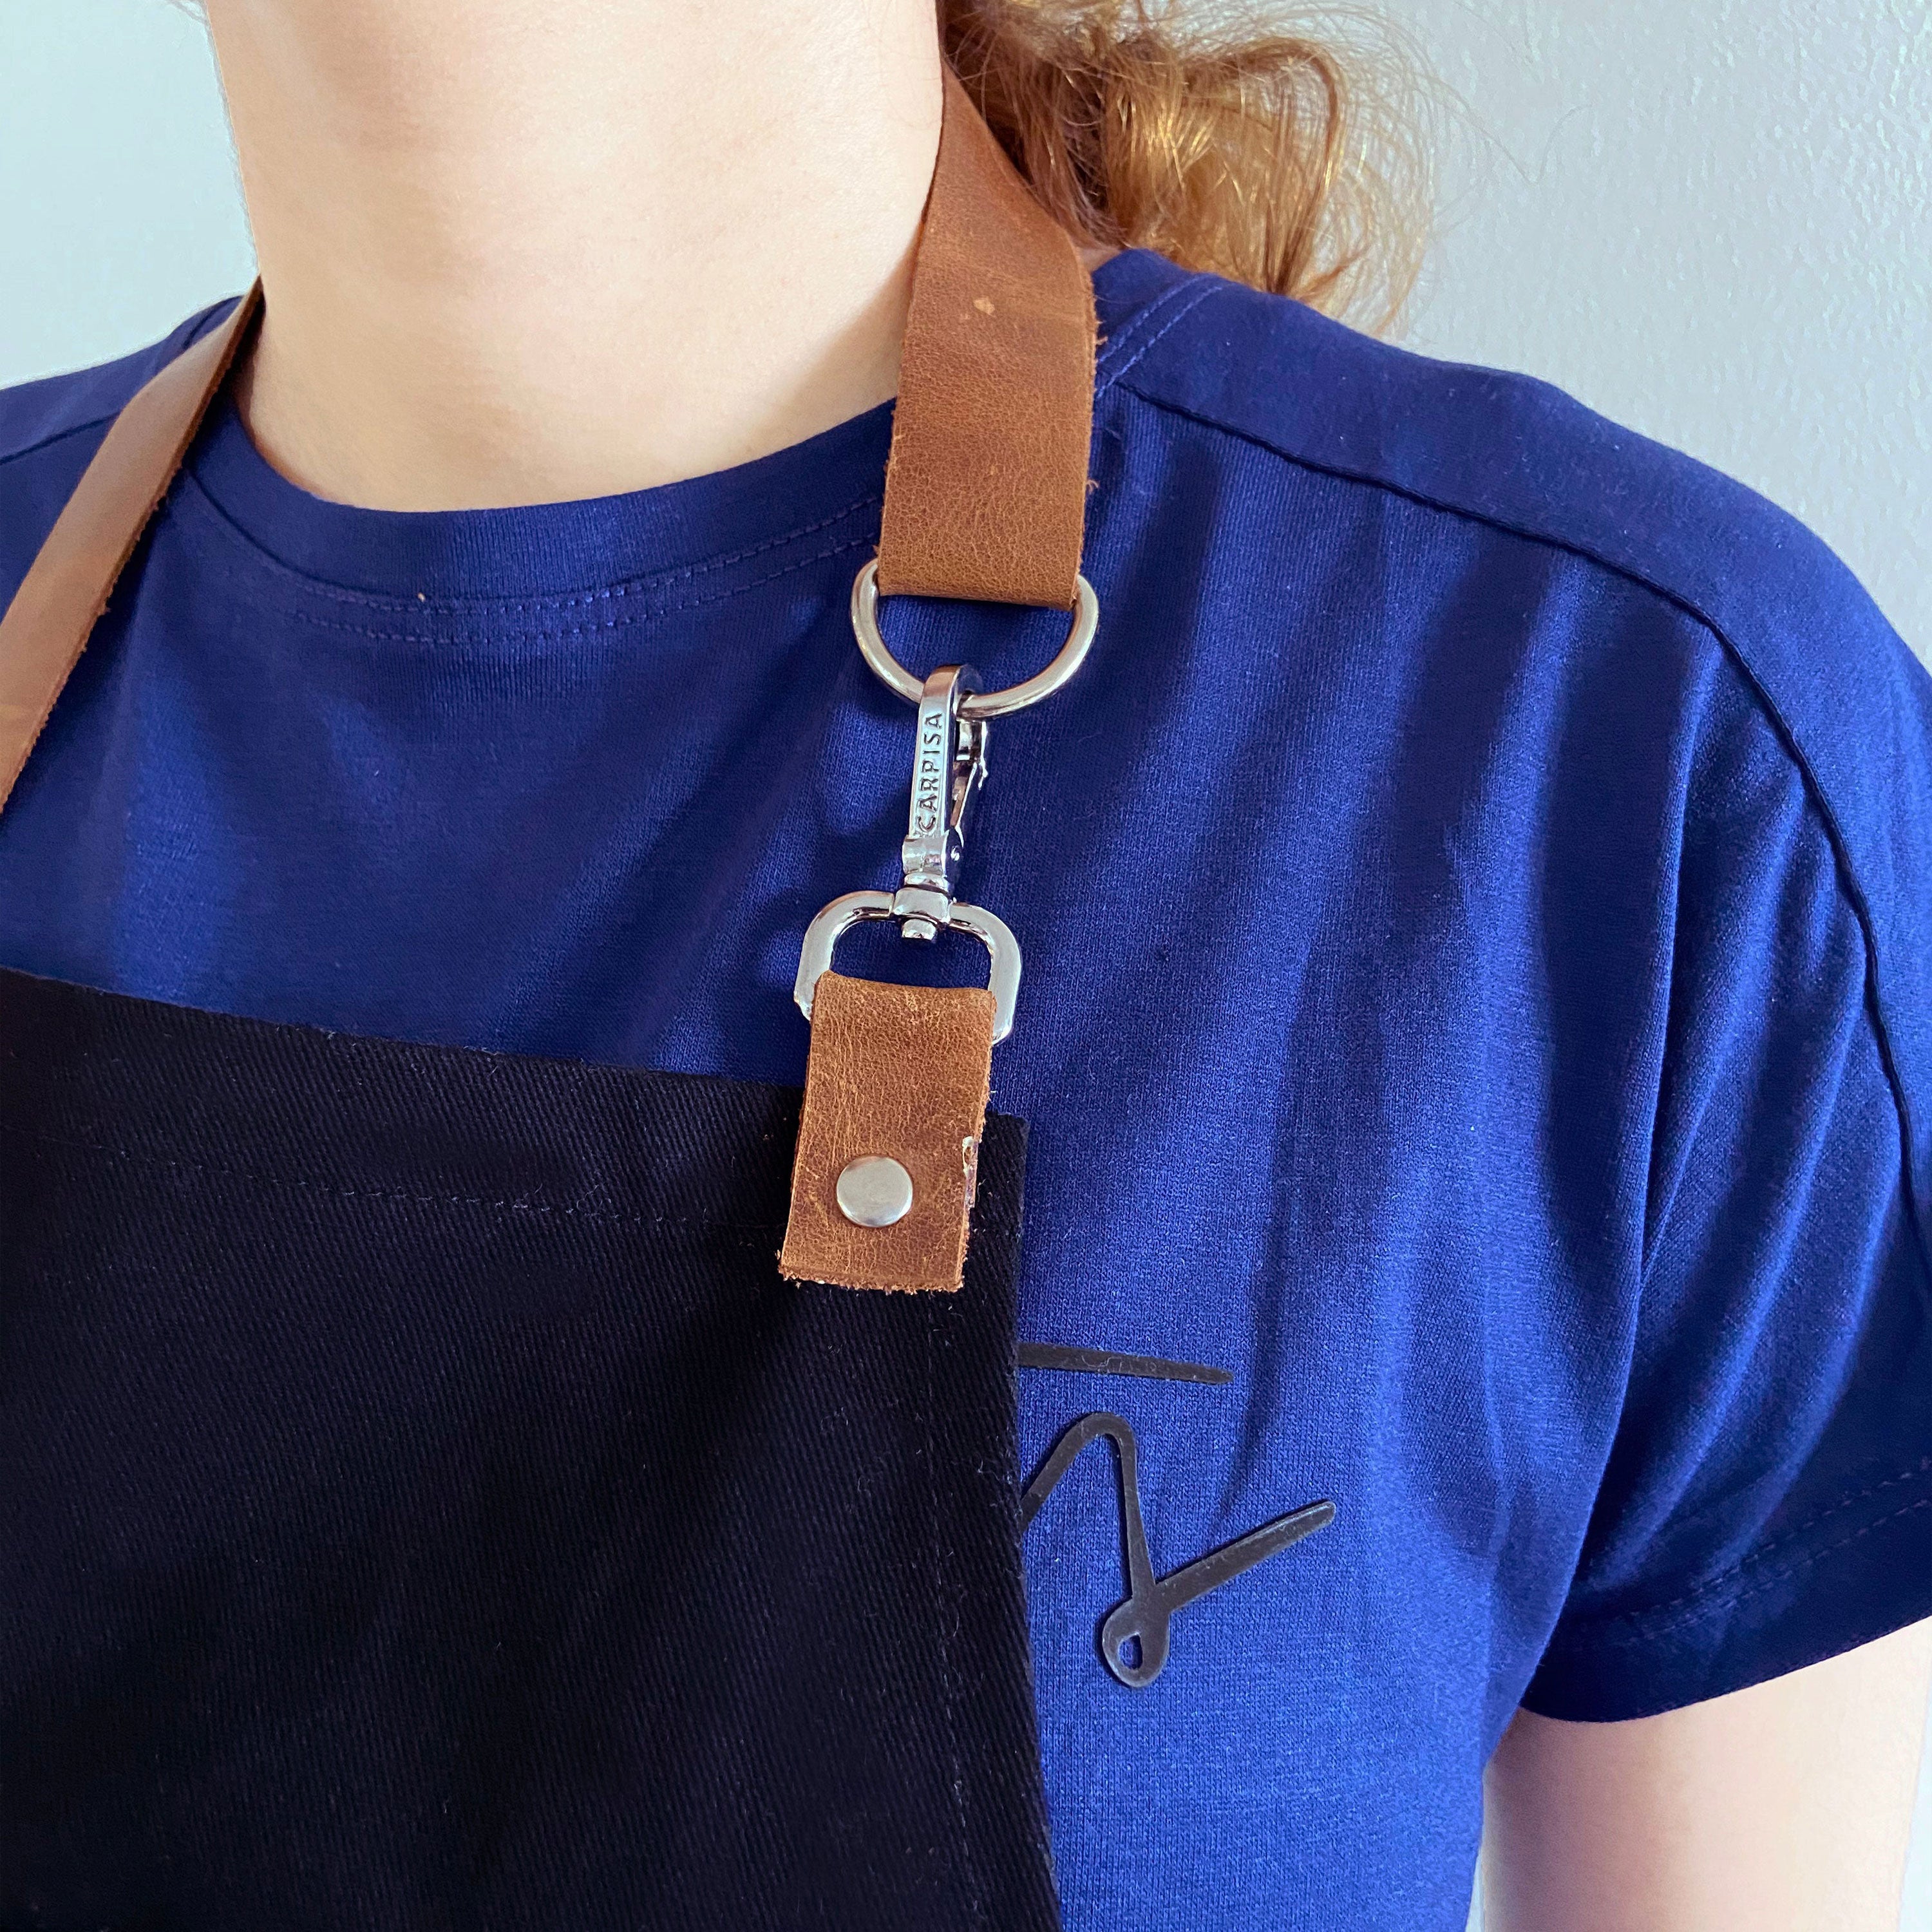 Custom Cooking Apron For Women With Leather Straps